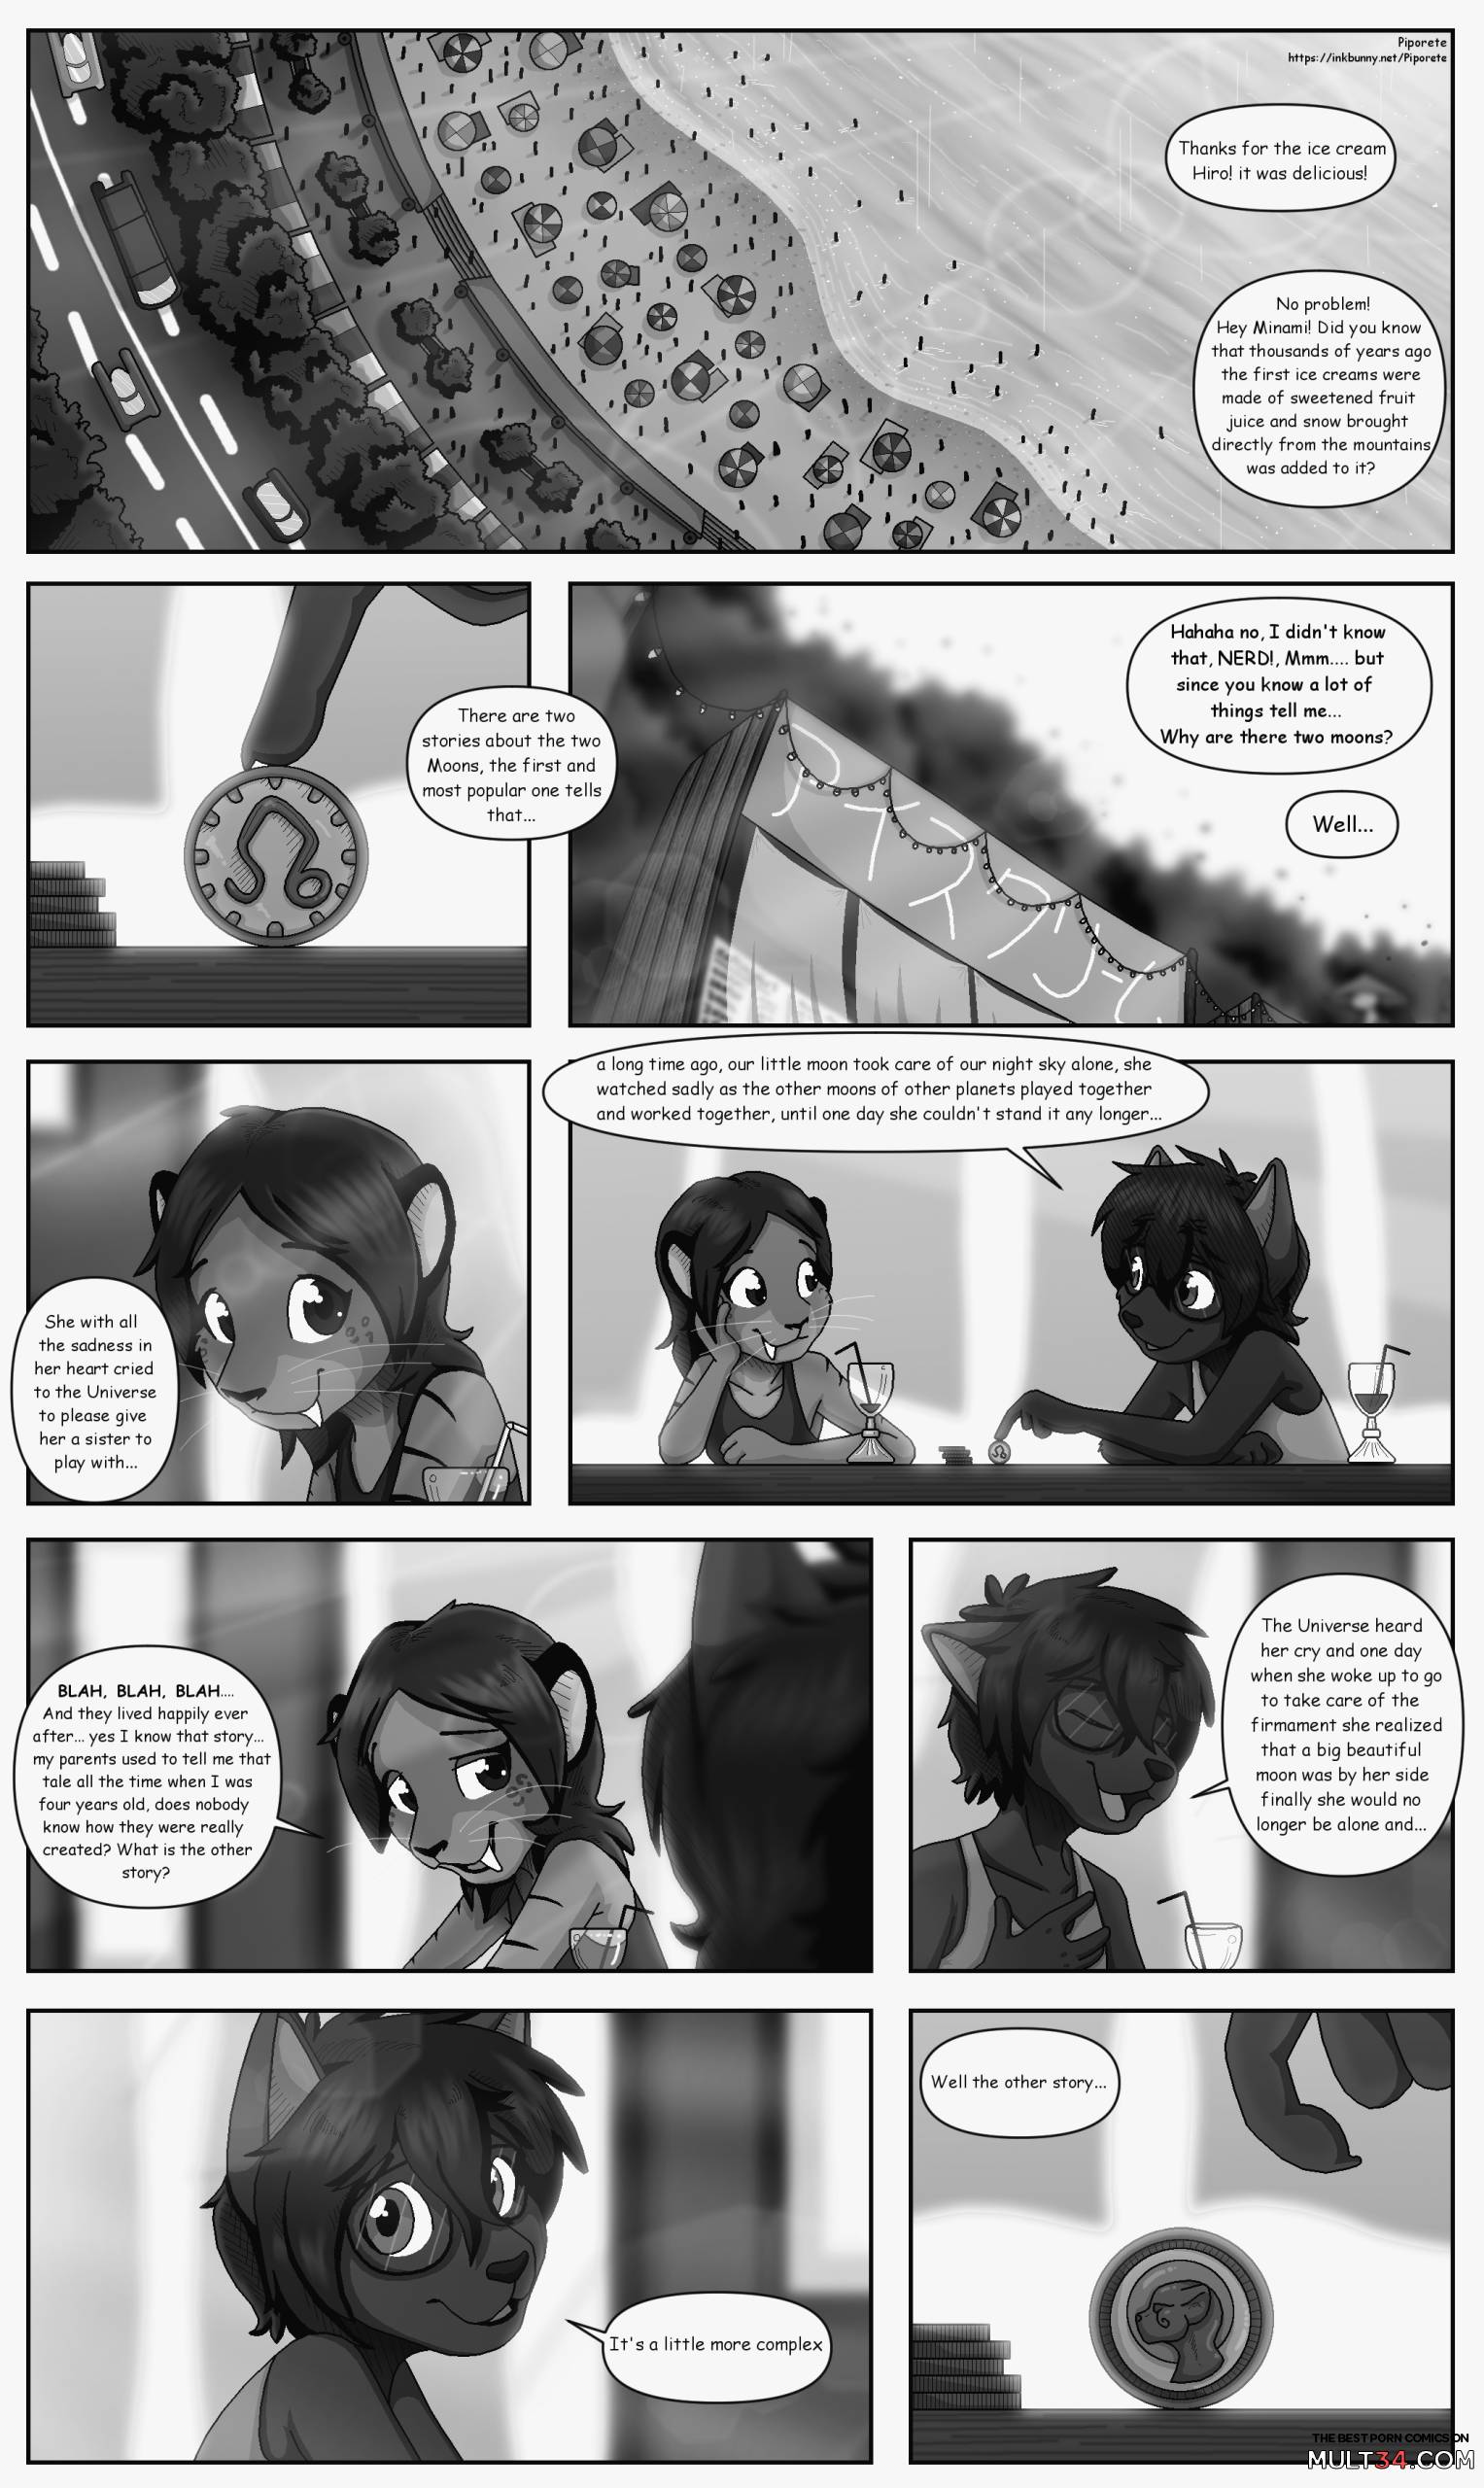 Keiko and Jin - Chapter 1 - 3 page 58